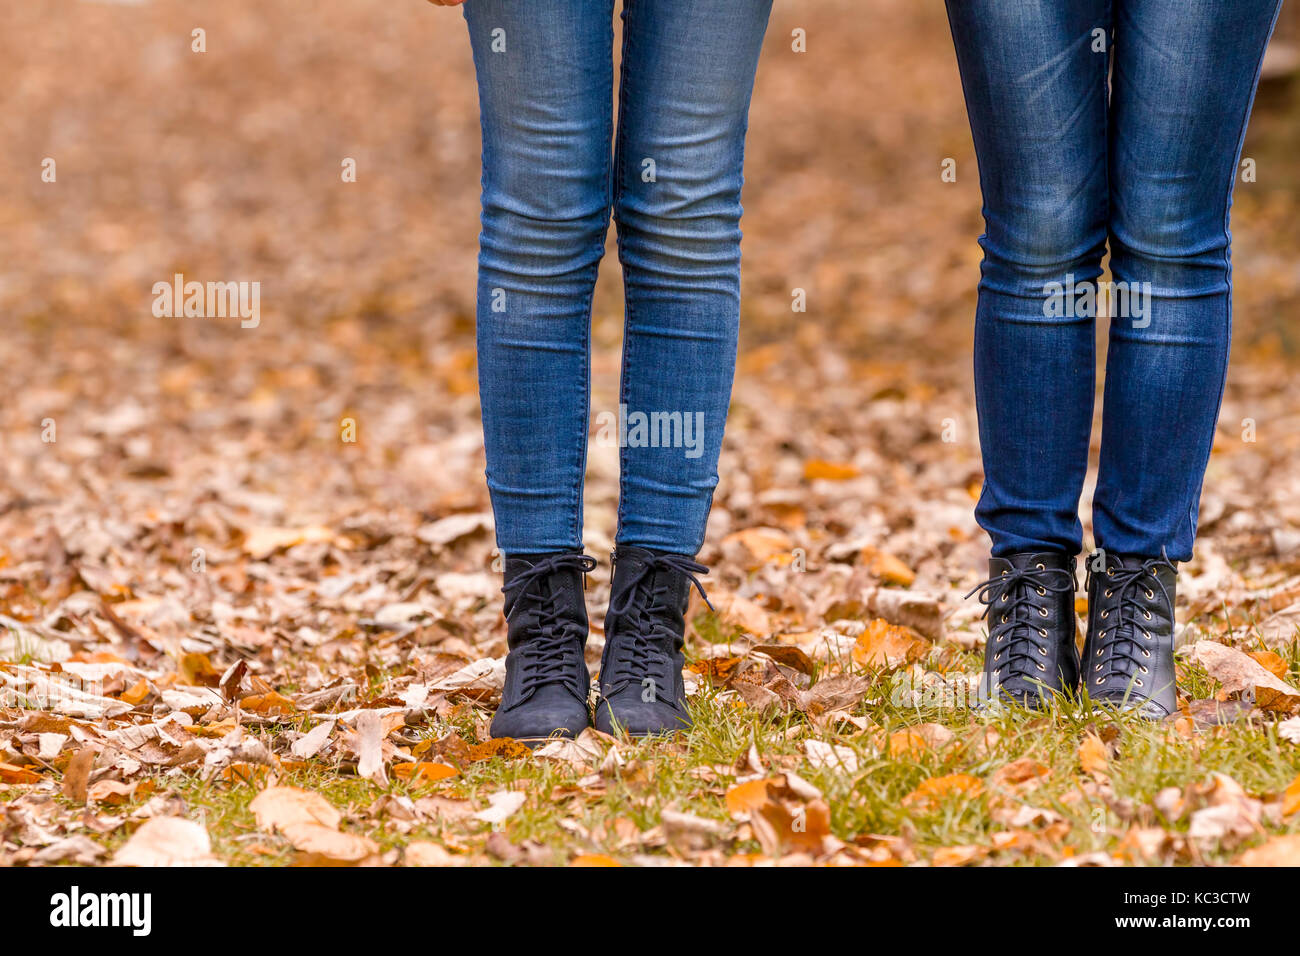 Girls feet boots walking on fall leaves outdoor with autumn season nature on background Stock Photo